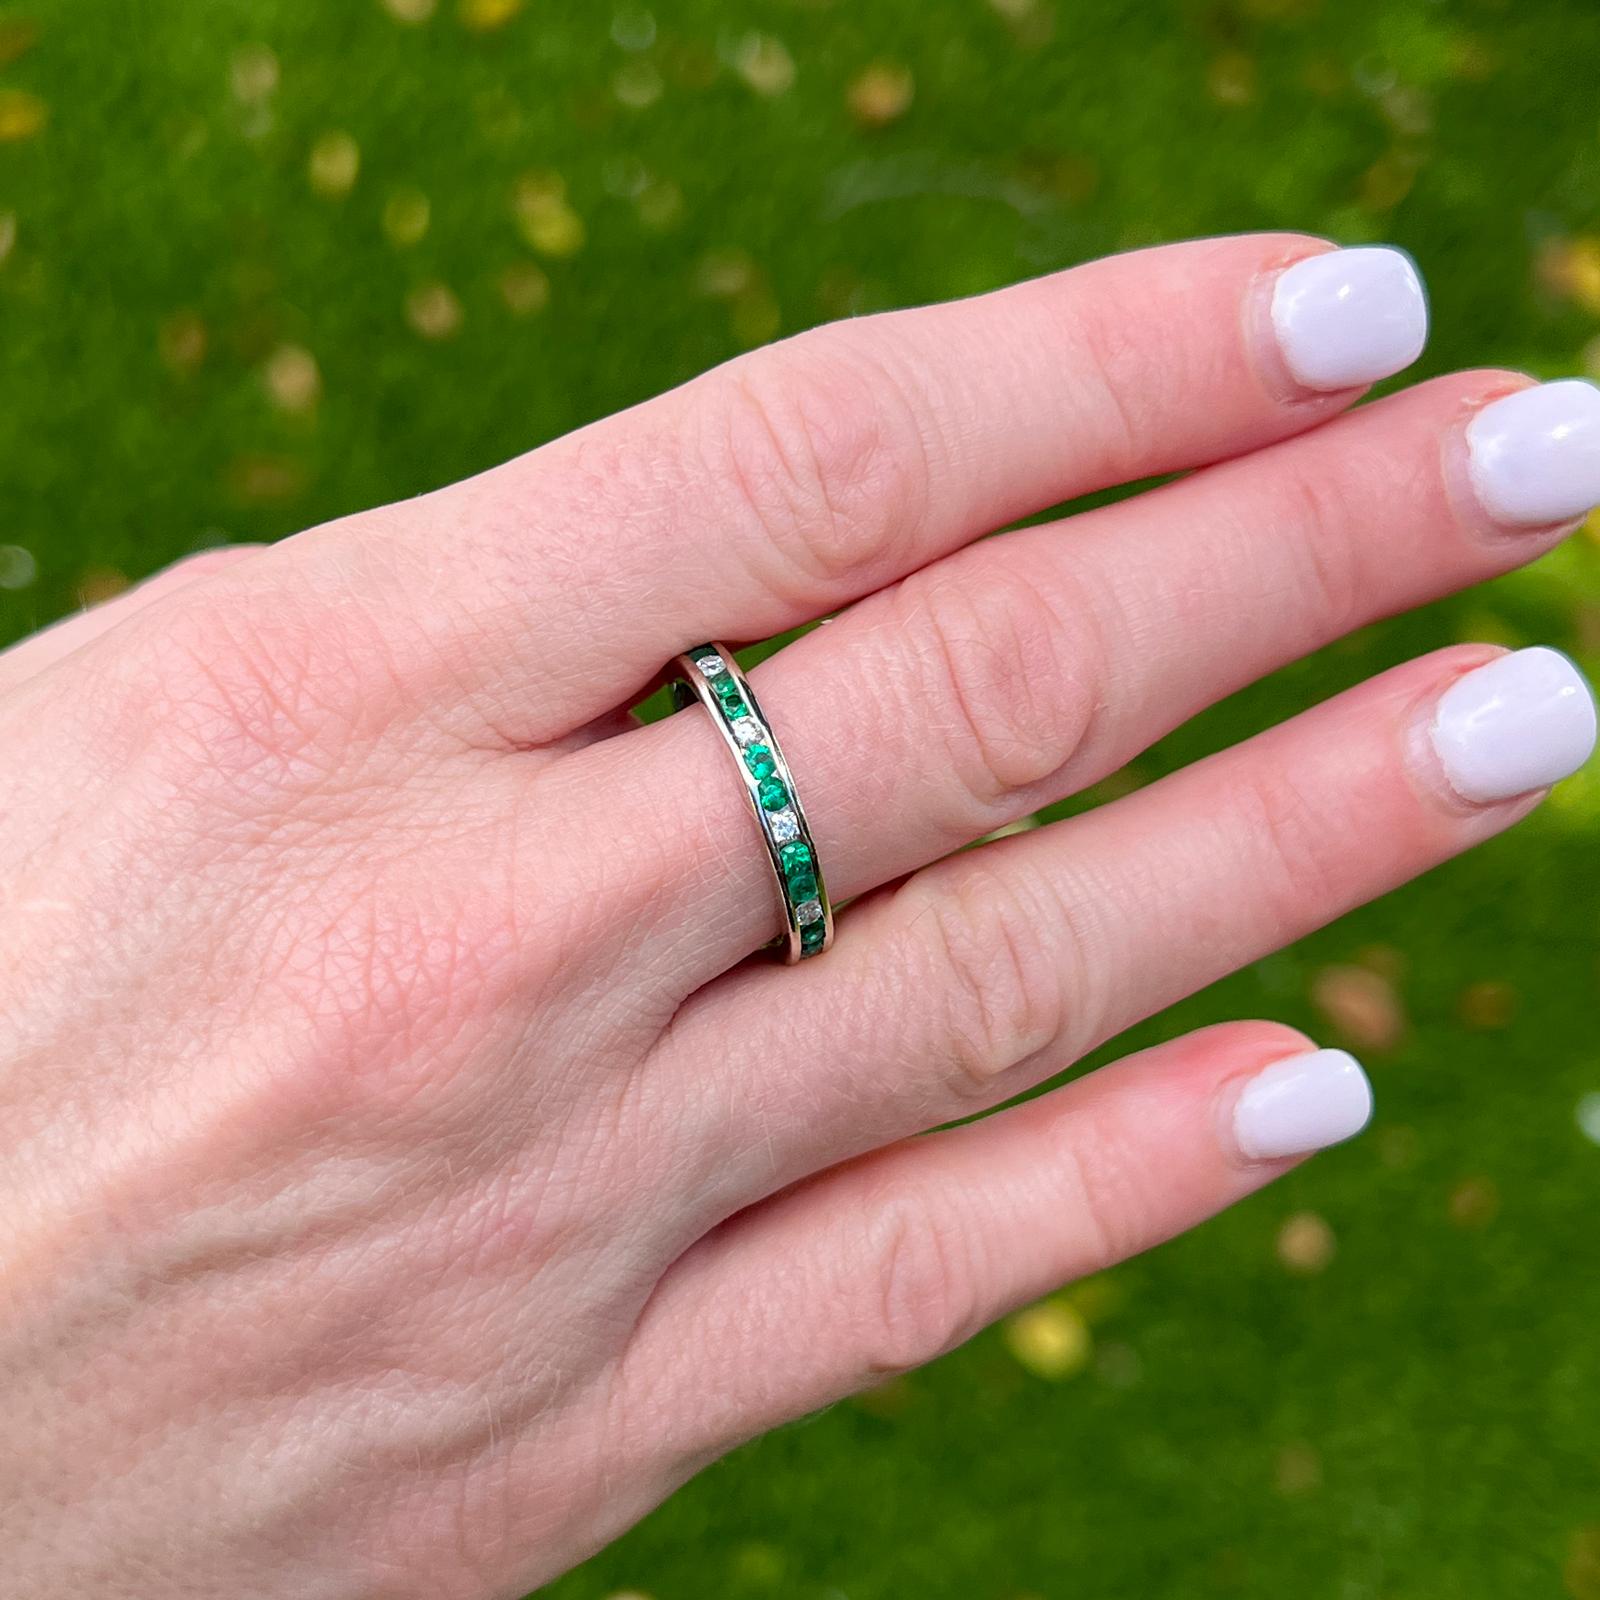 Emerald and diamond eternity band crafted in 18 karat white gold. The band features 10 round brilliant cut diamonds and 20 round cut emeralds. The diamonds weigh approximately .40 CTW and the emeralds approximately .80 CTW. The ring measures 3.5mm